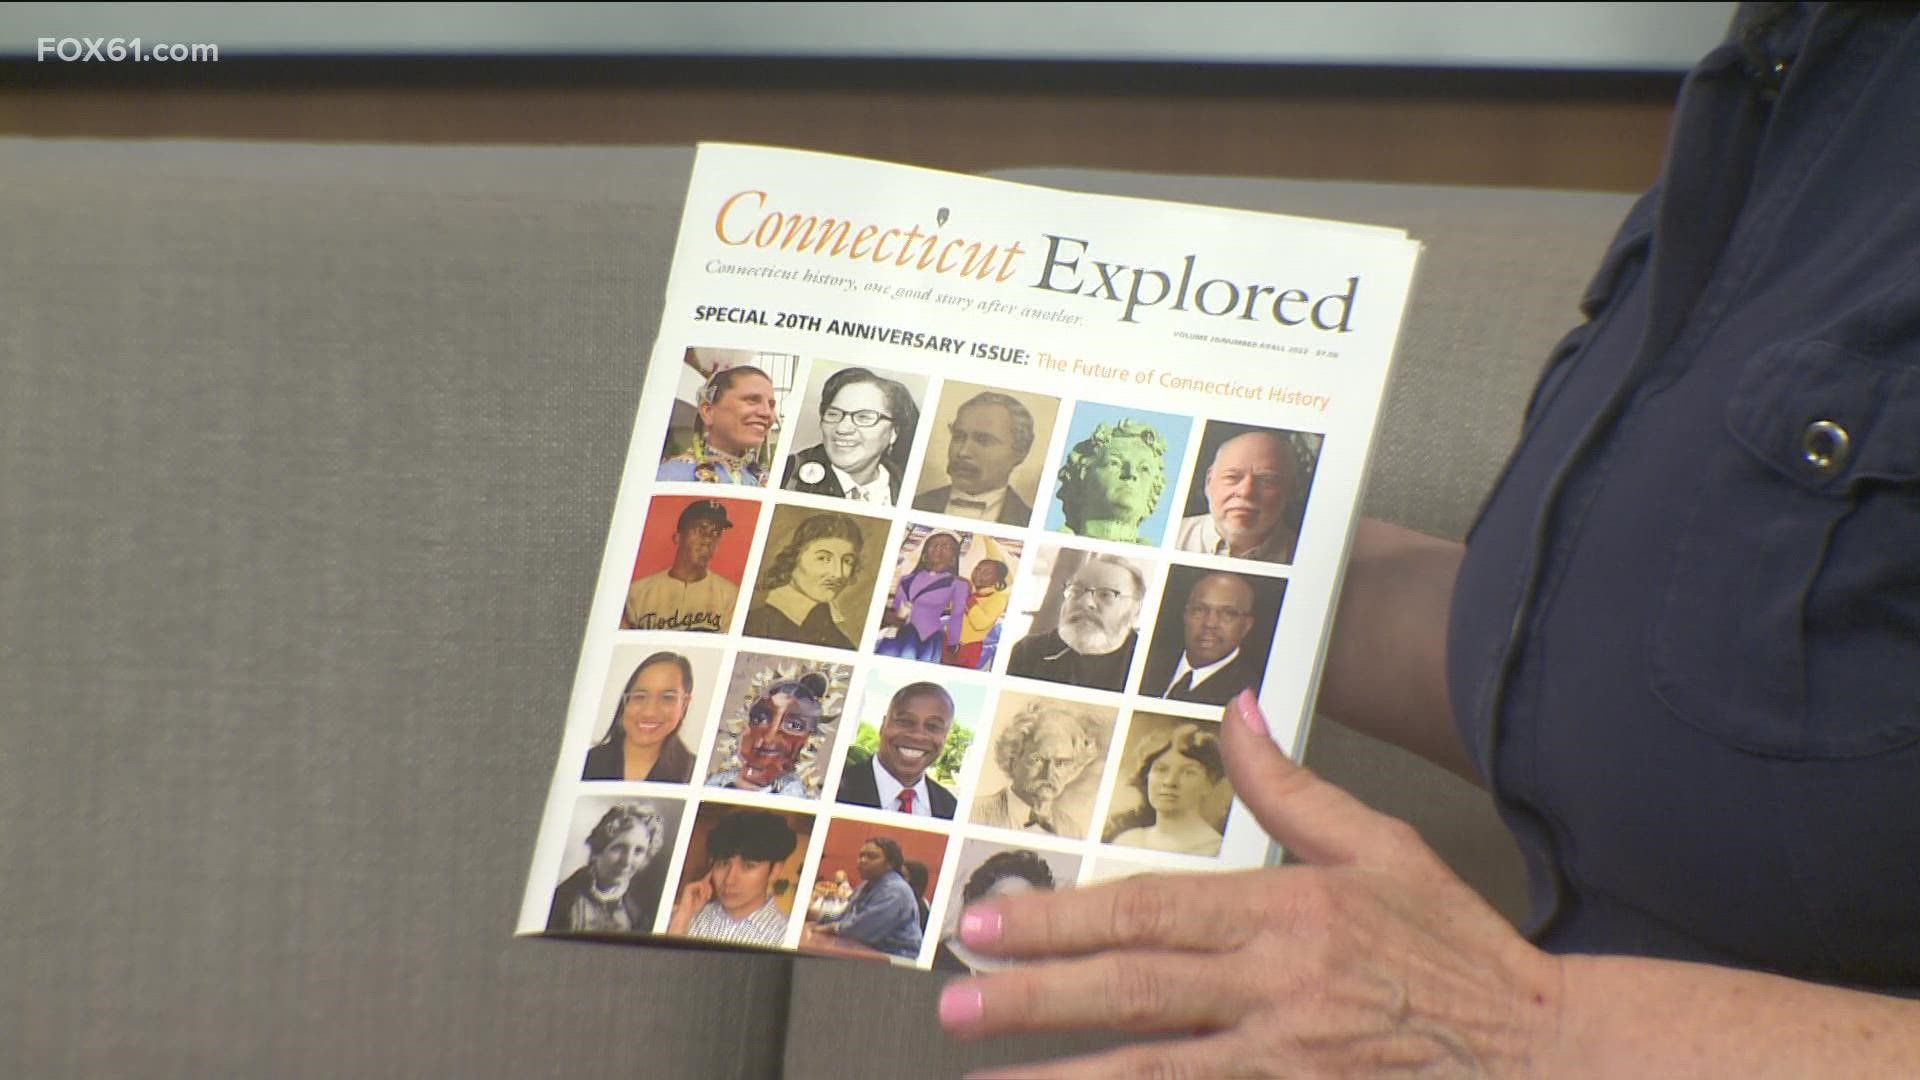 Connecticut Explored magazine has announced its  “20 for 20: Innovation in Connecticut History" series. Kathy Hermes visited Studio 61 to share more details.